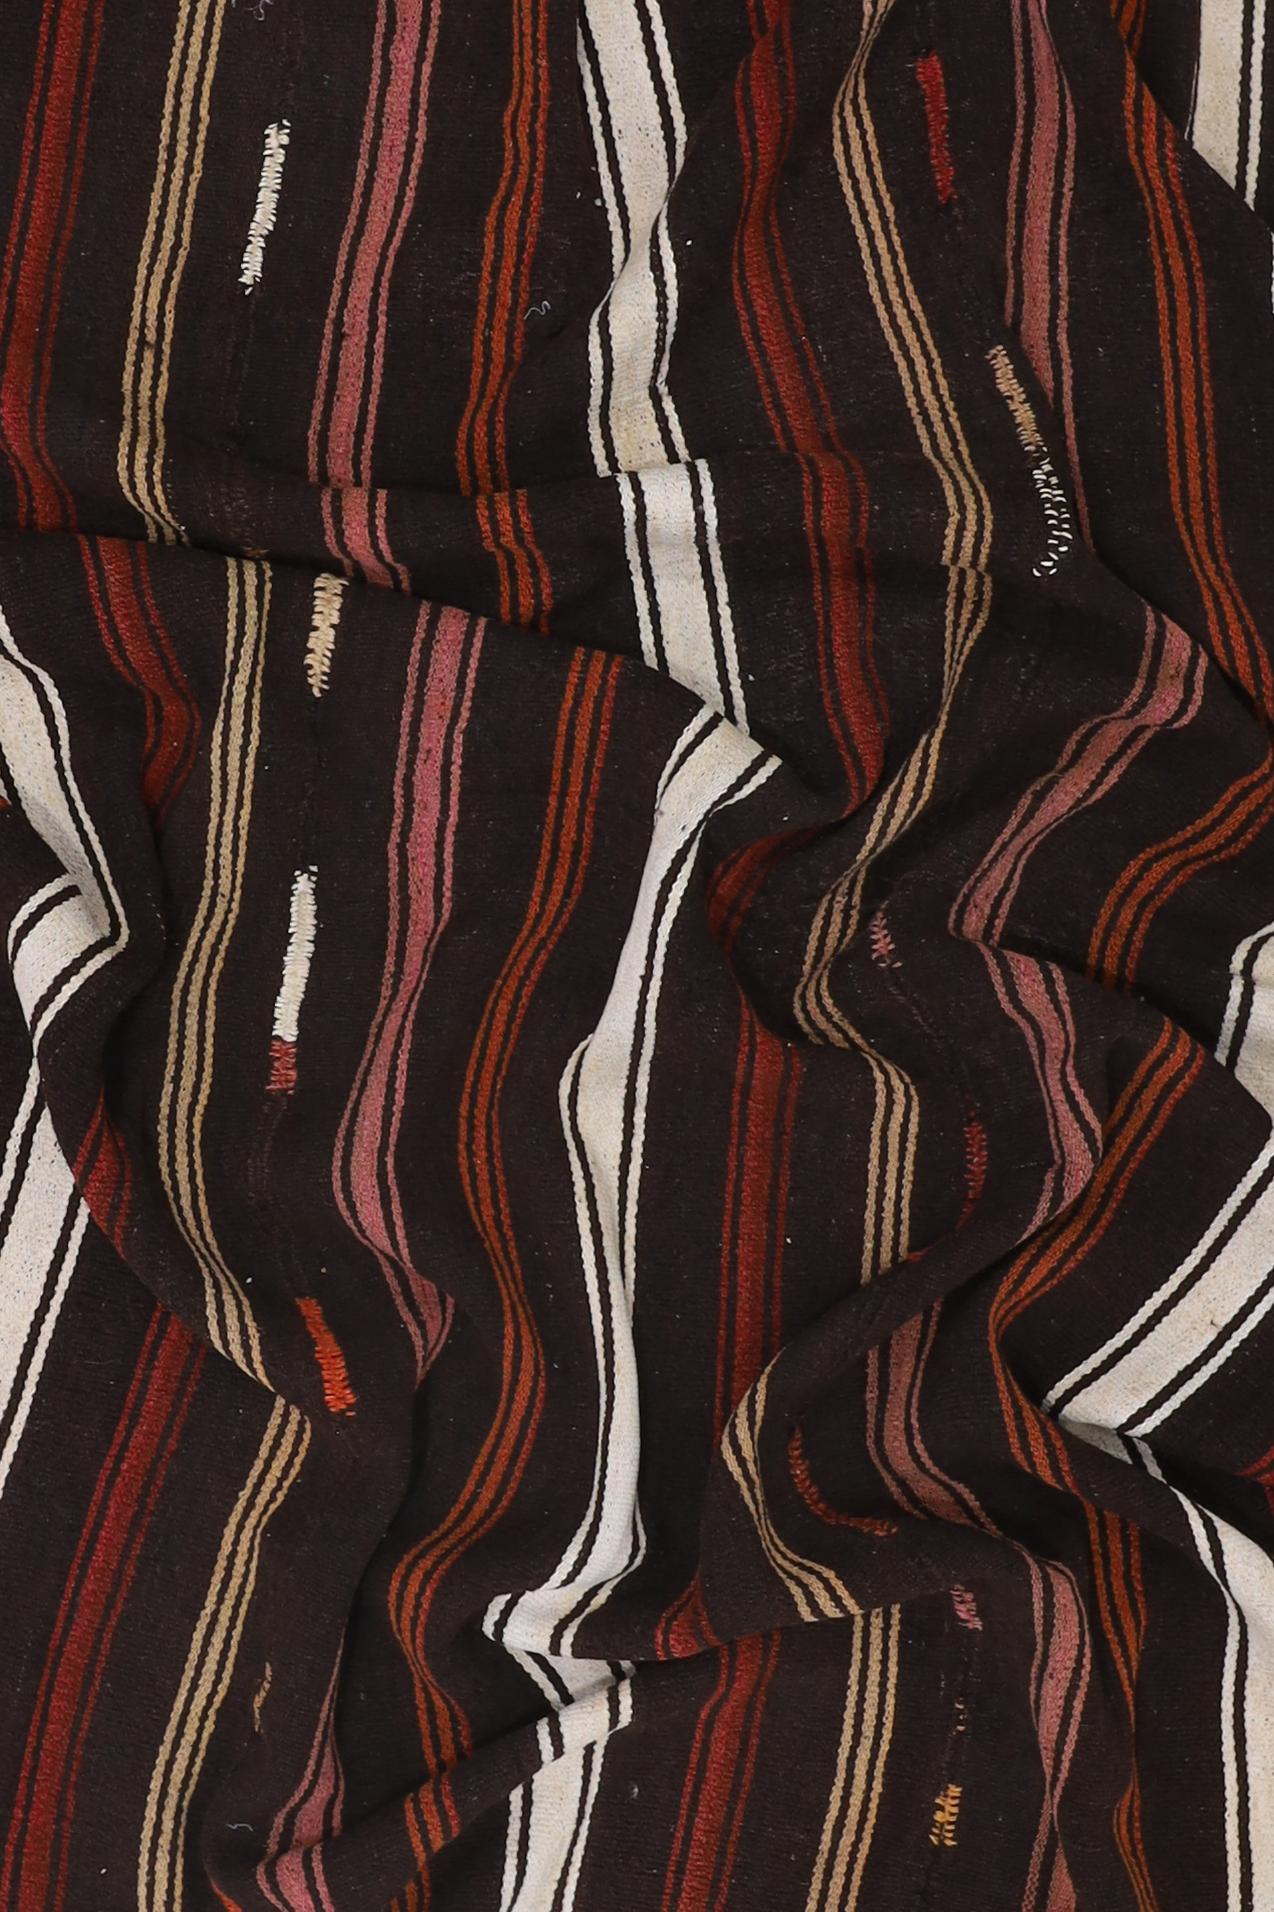 Colors: Washed black, tomato, sandstone, burnt orange, dusty pink, white
Wear Notes: 1
Pile: Flatweave

We love the playful and organic feel of the various color stripes and wabi-sabi stitching. The perfect way to add a little pop of color to